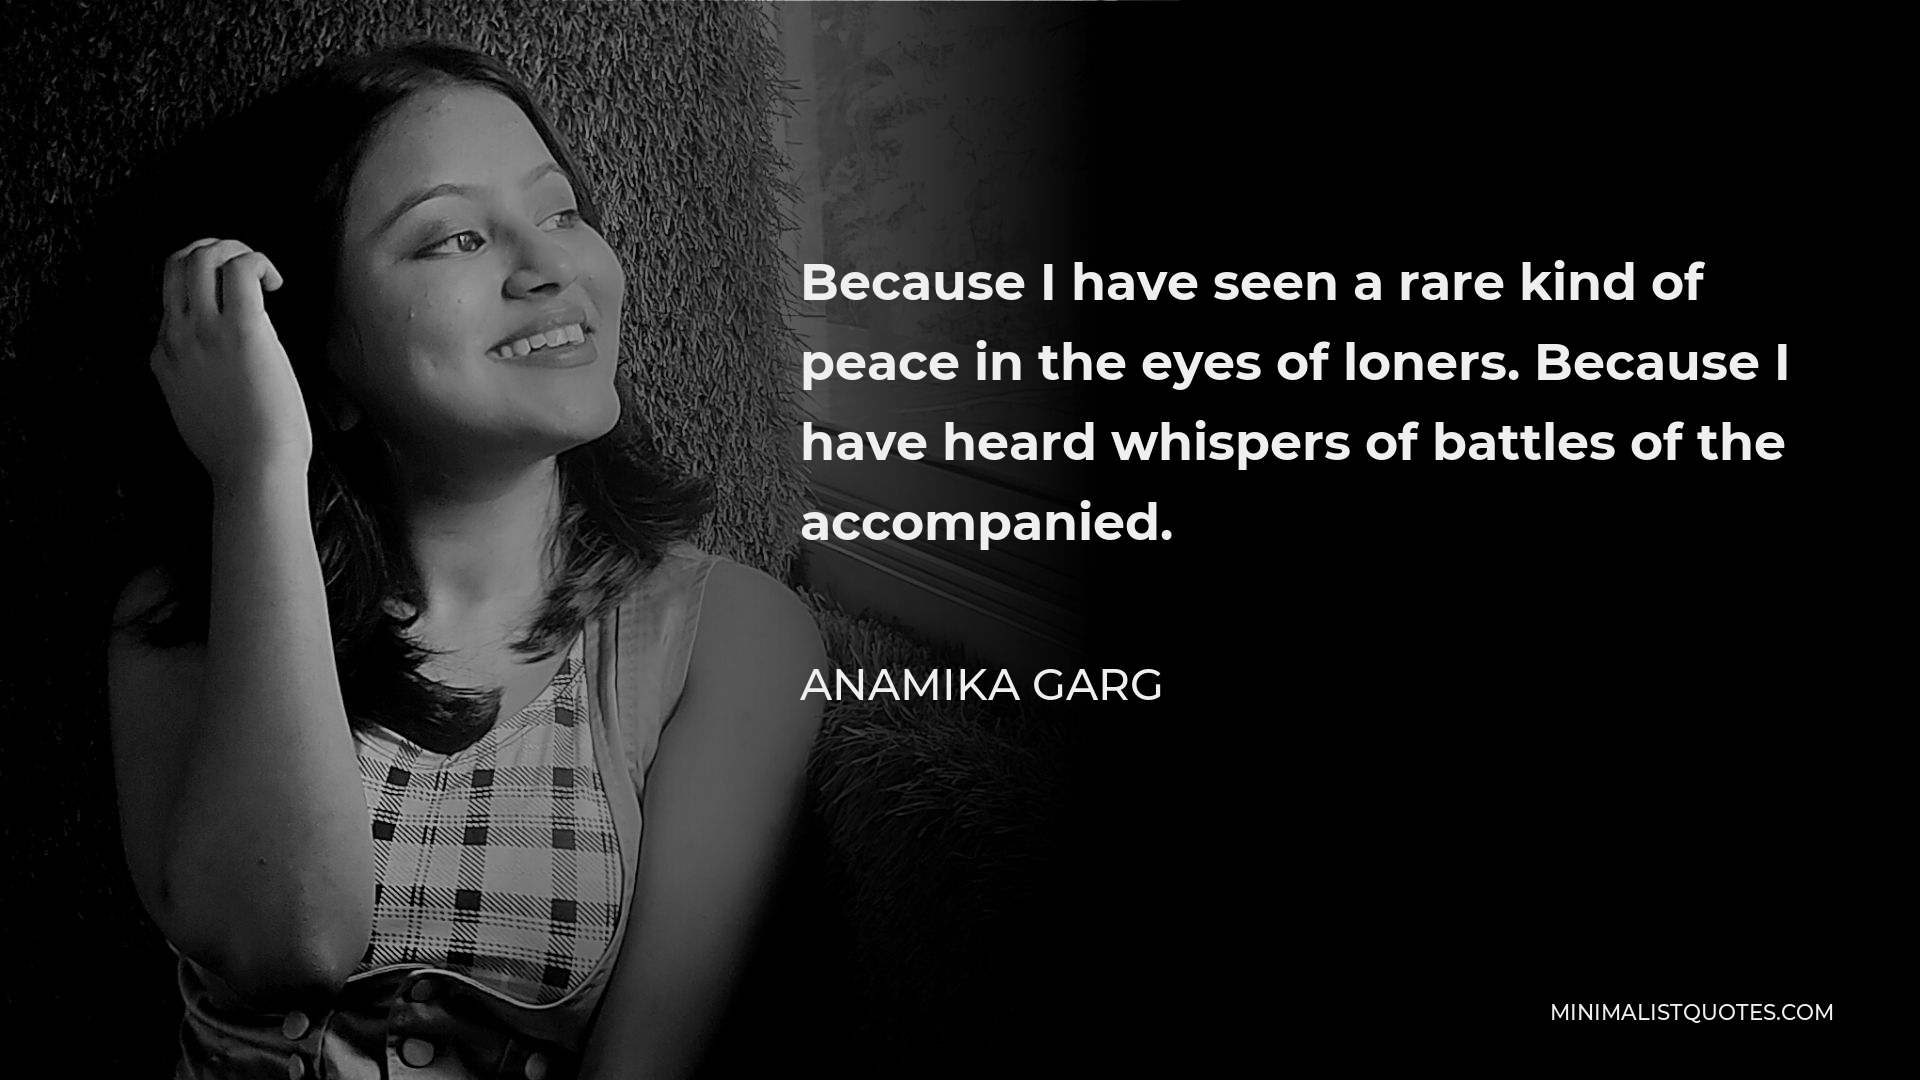 Anamika Garg Quote - Because I have seen a rare kind of peace in the eyes of loners. Because I have heard whispers of battles of the accompanied.